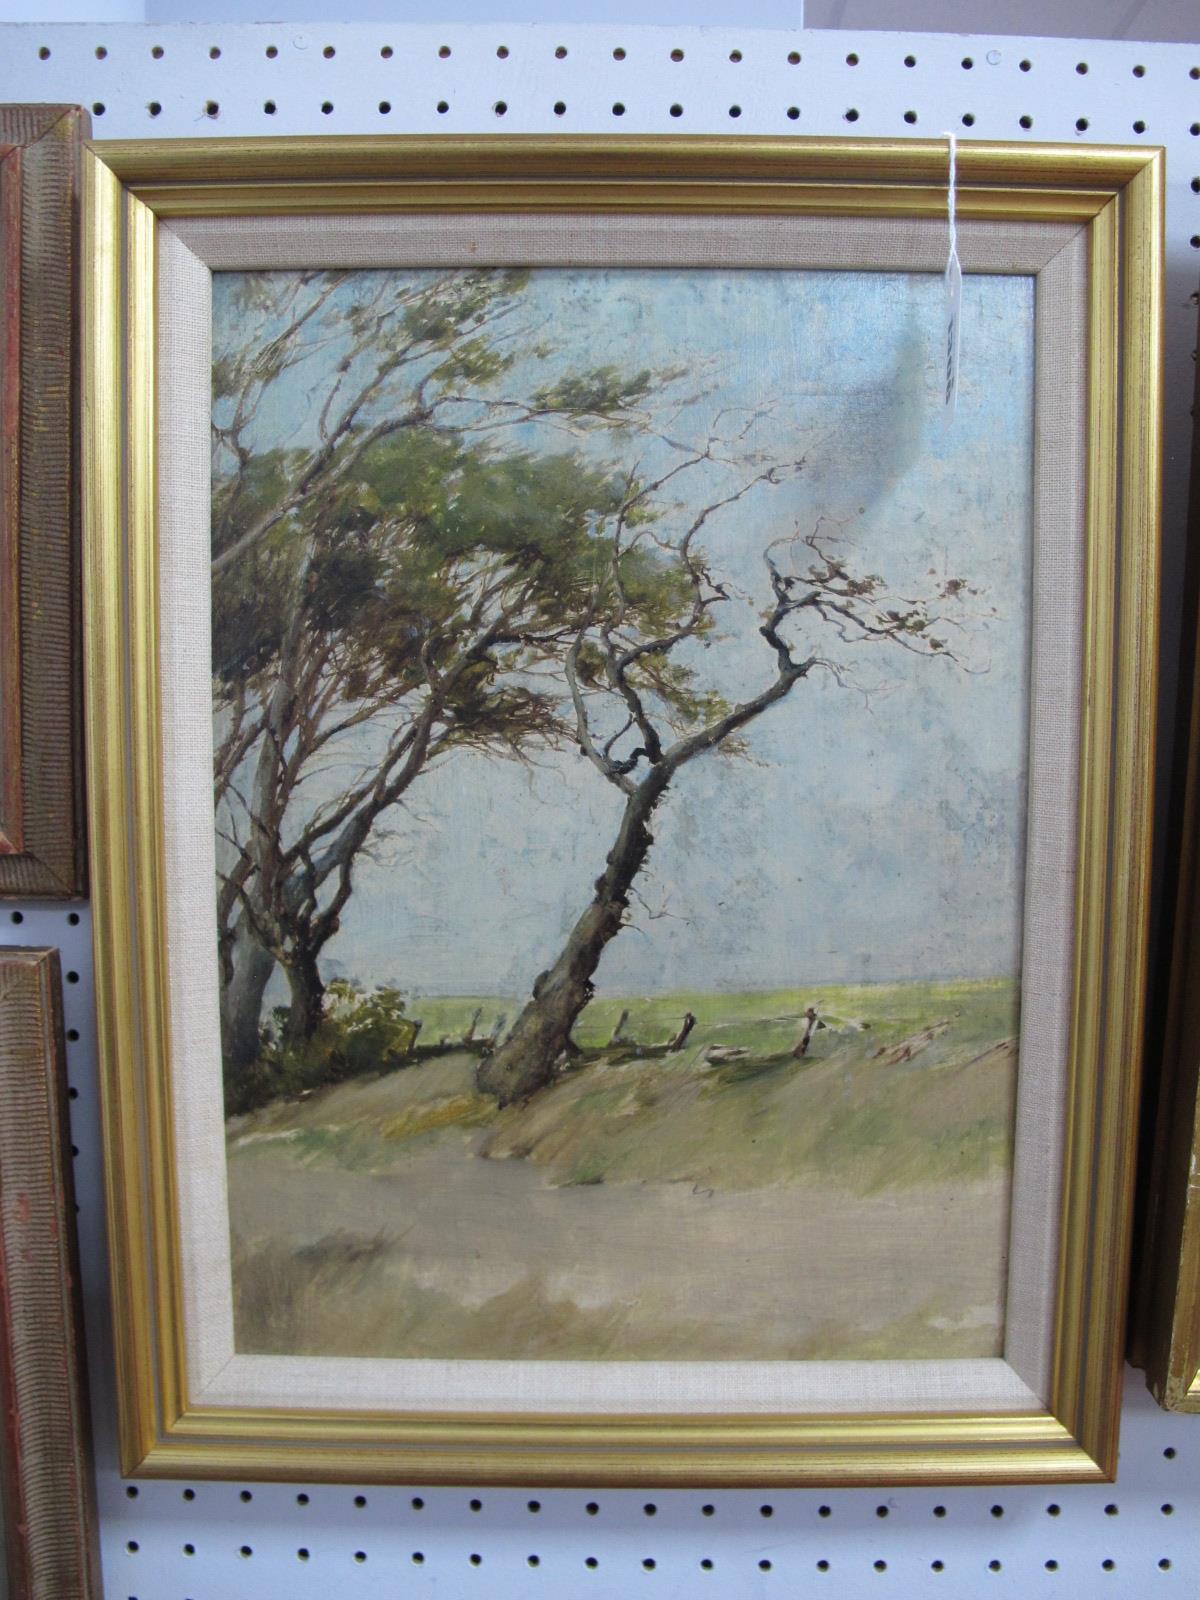 ATTRIBUTED TO JOHN TERRIS (1865-1914) Trees in a Windy Landscape, oil on canvas, unsigned, bears